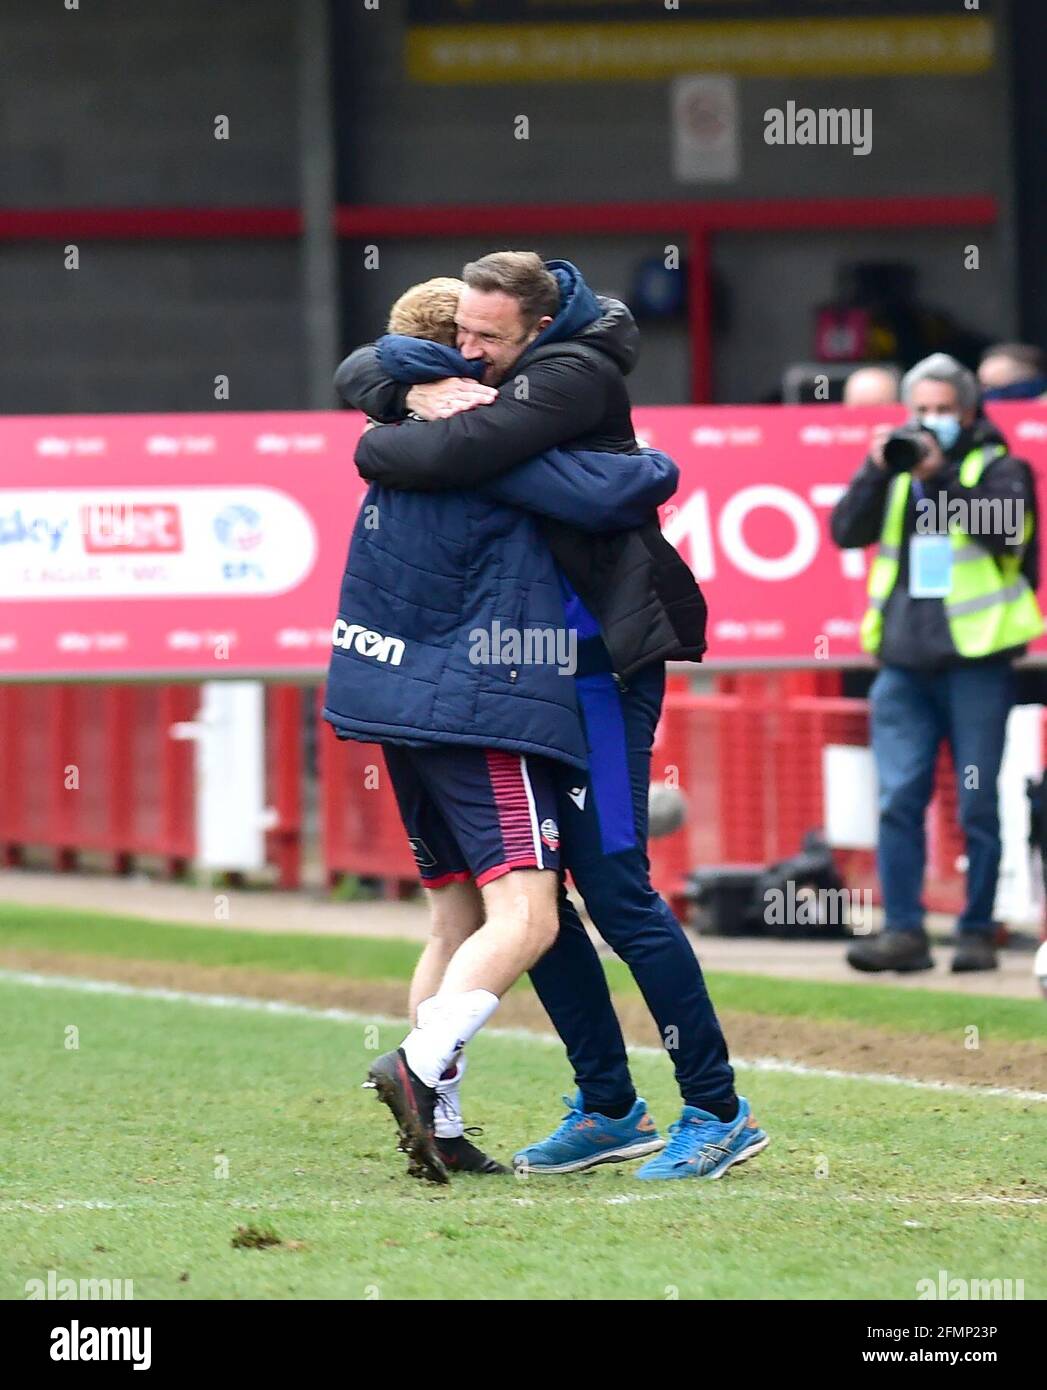 Bolton manager Ian Evatt (rght) celebrates promotion after their win against Crawley in the Sky Bet League Two match between Crawley Town and Bolton Wanderers at the People's Pension Stadium  , Crawley ,  UK - 8th May 2021 -  EDITORIAL USE ONLY No use with unauthorised audio, video, data, fixture lists, club/league logos or “live” services. Online in-match use limited to 120 images, no video emulation. No use in betting, games or single club/league/player publications Stock Photo